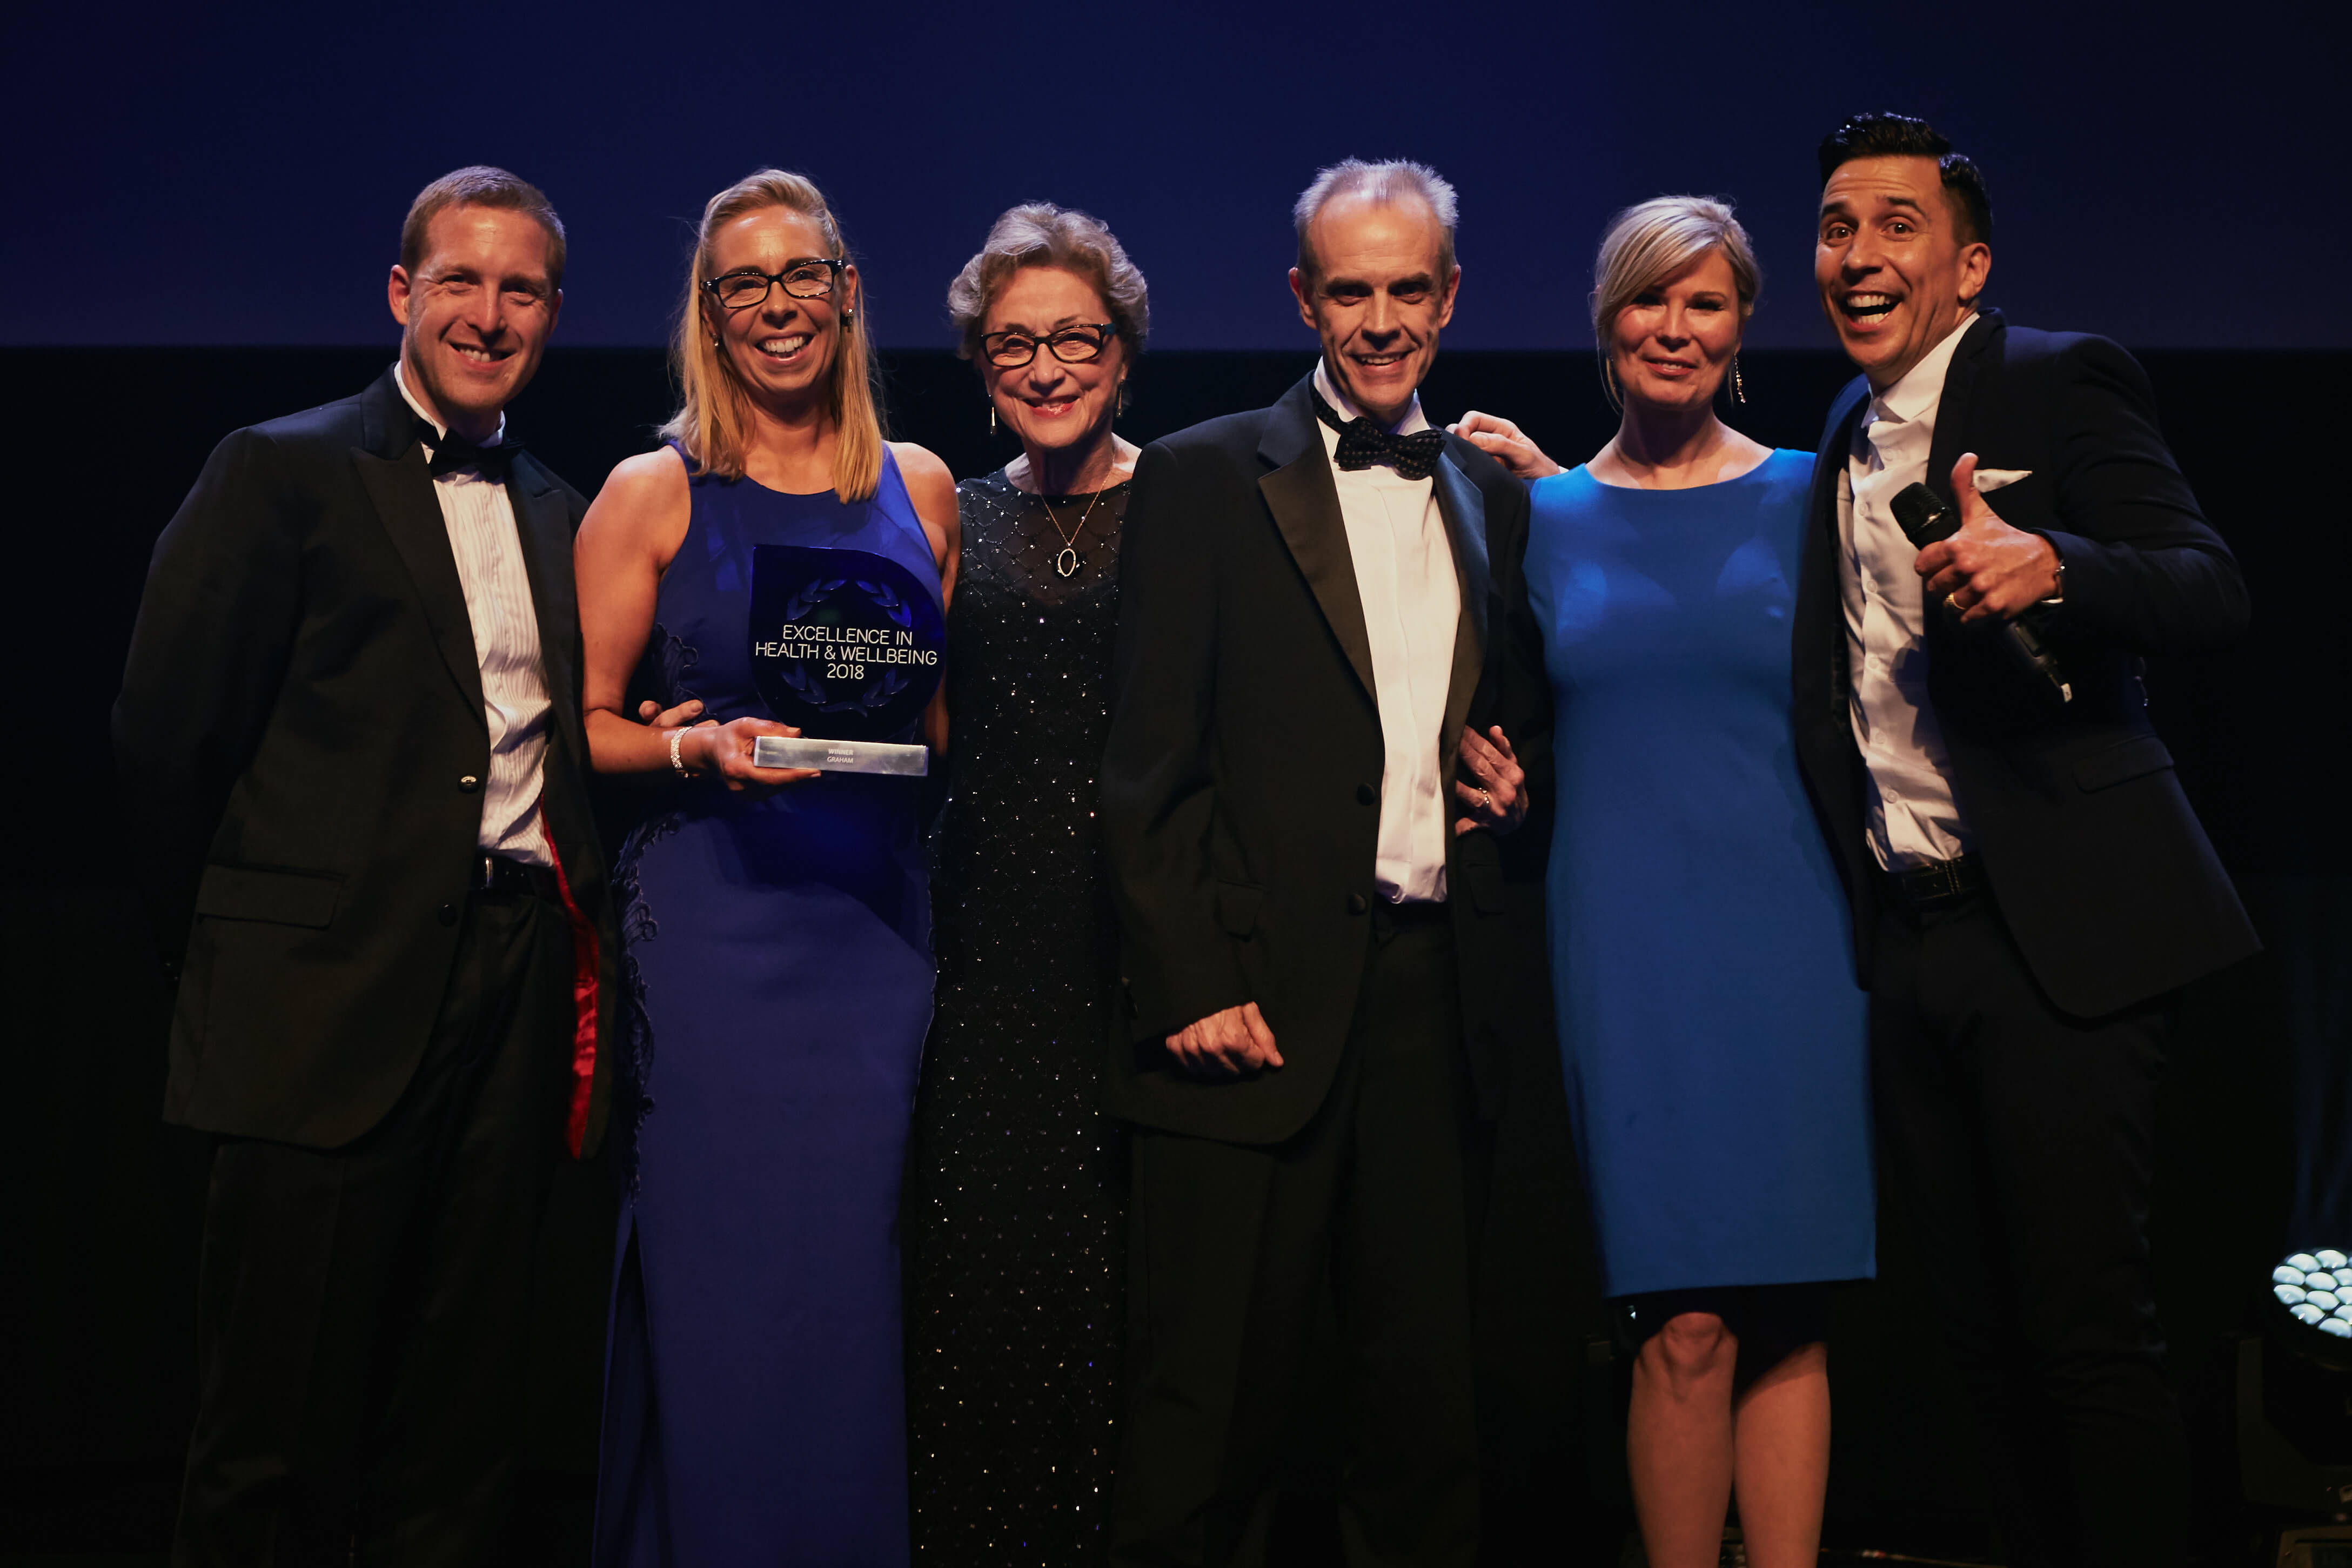 GRAHAM selected as inaugural winner of IIP Excellence in Health and Wellbeing Award image